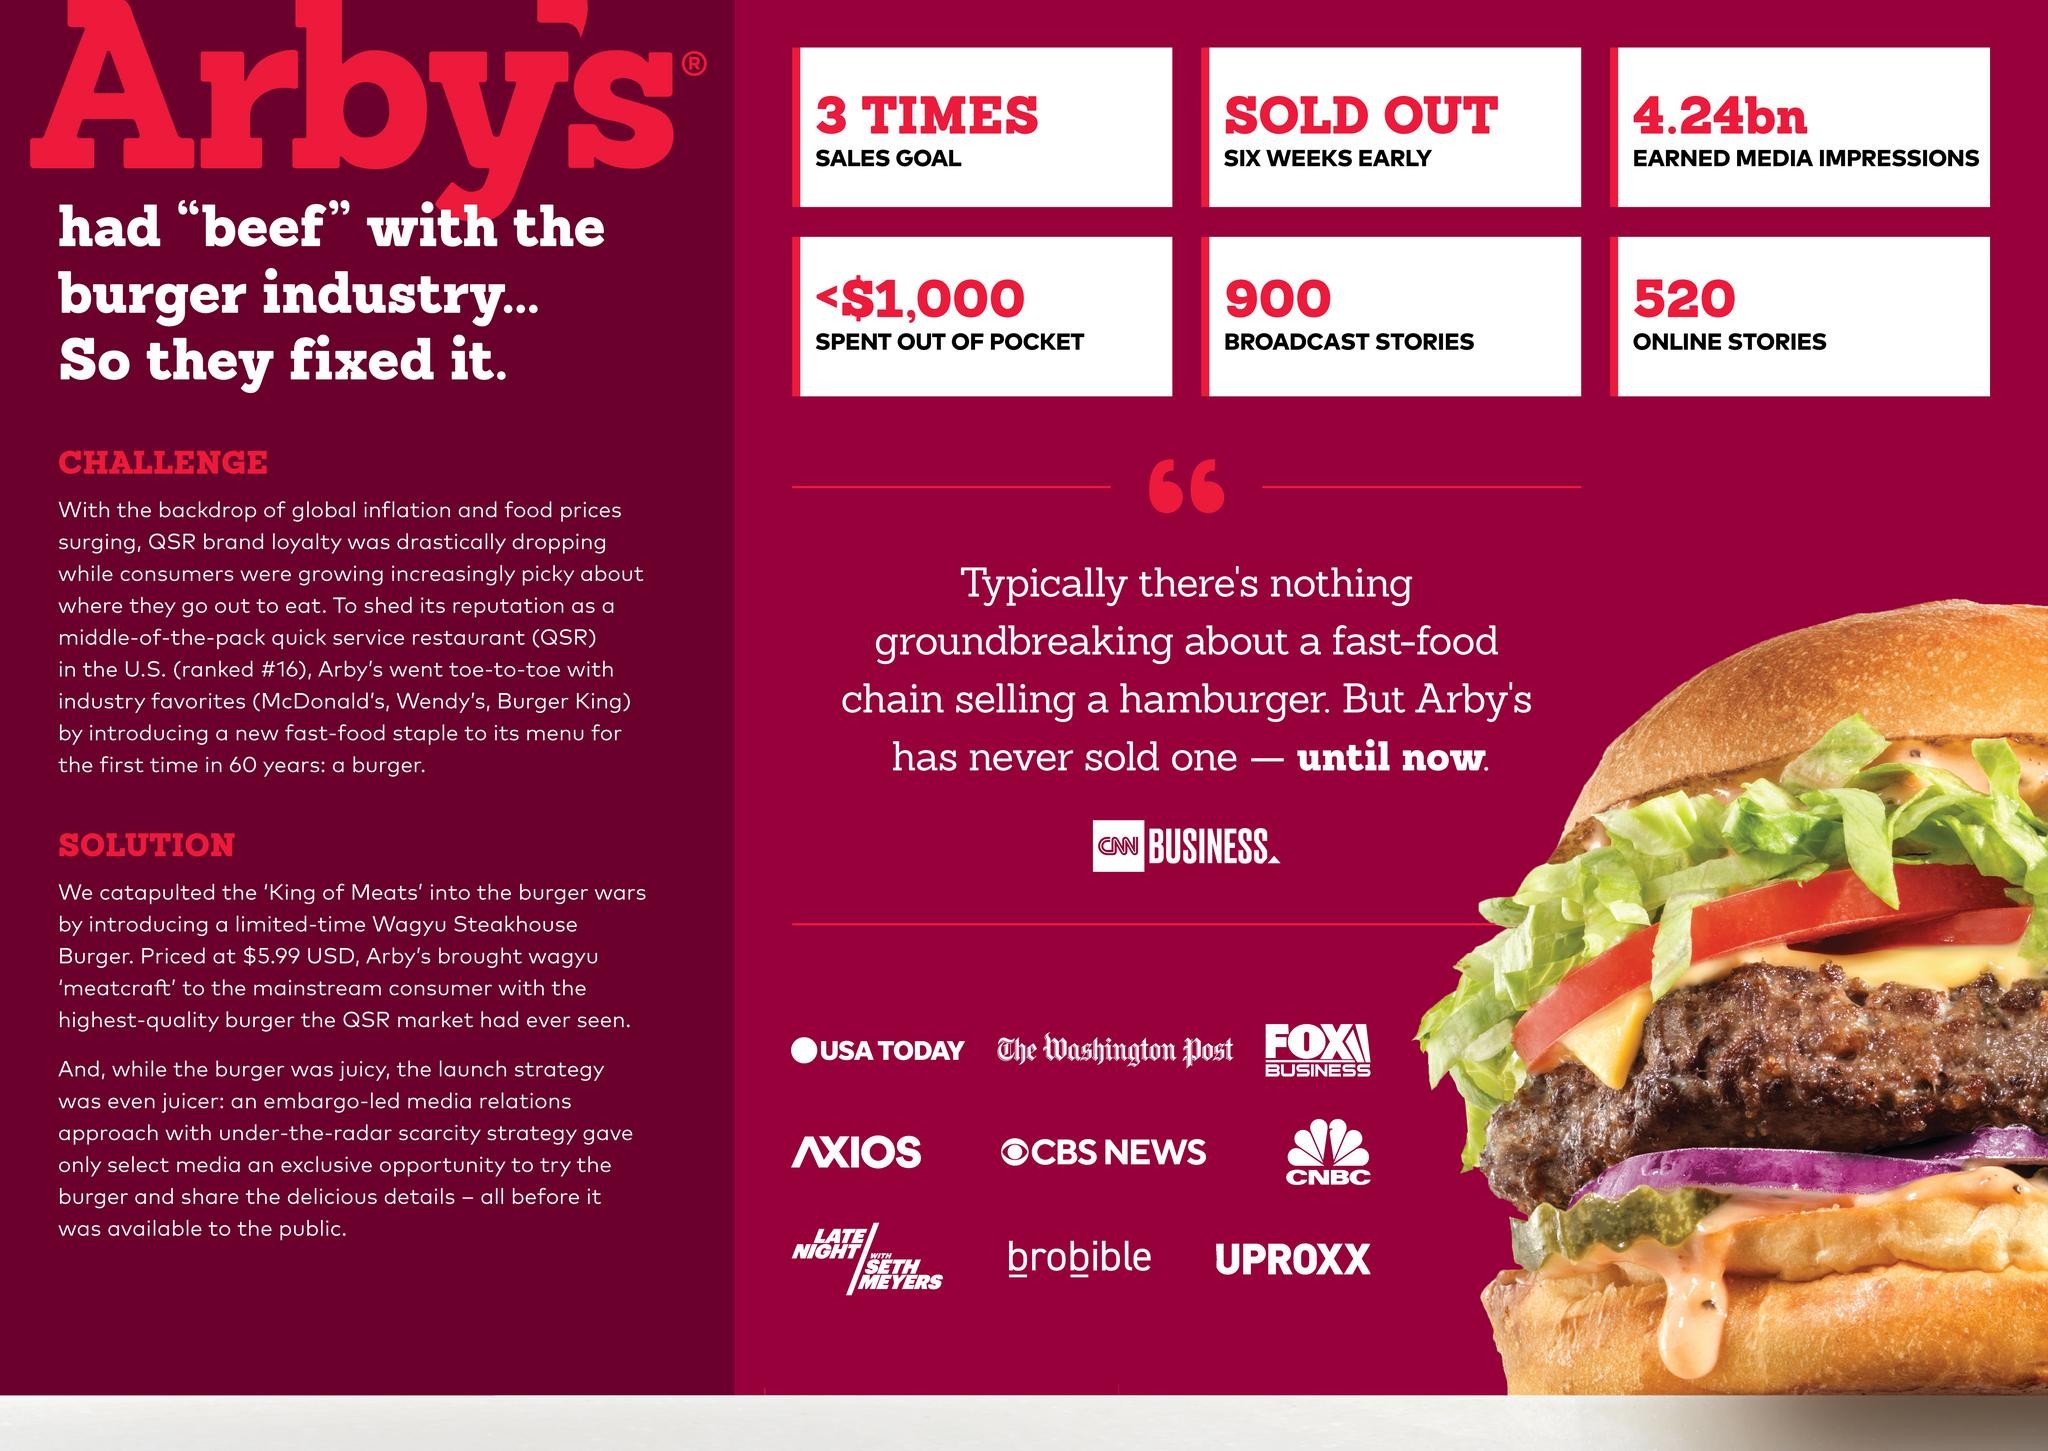 Arby's Had Beef With the Burger Industry, so They Fixed It